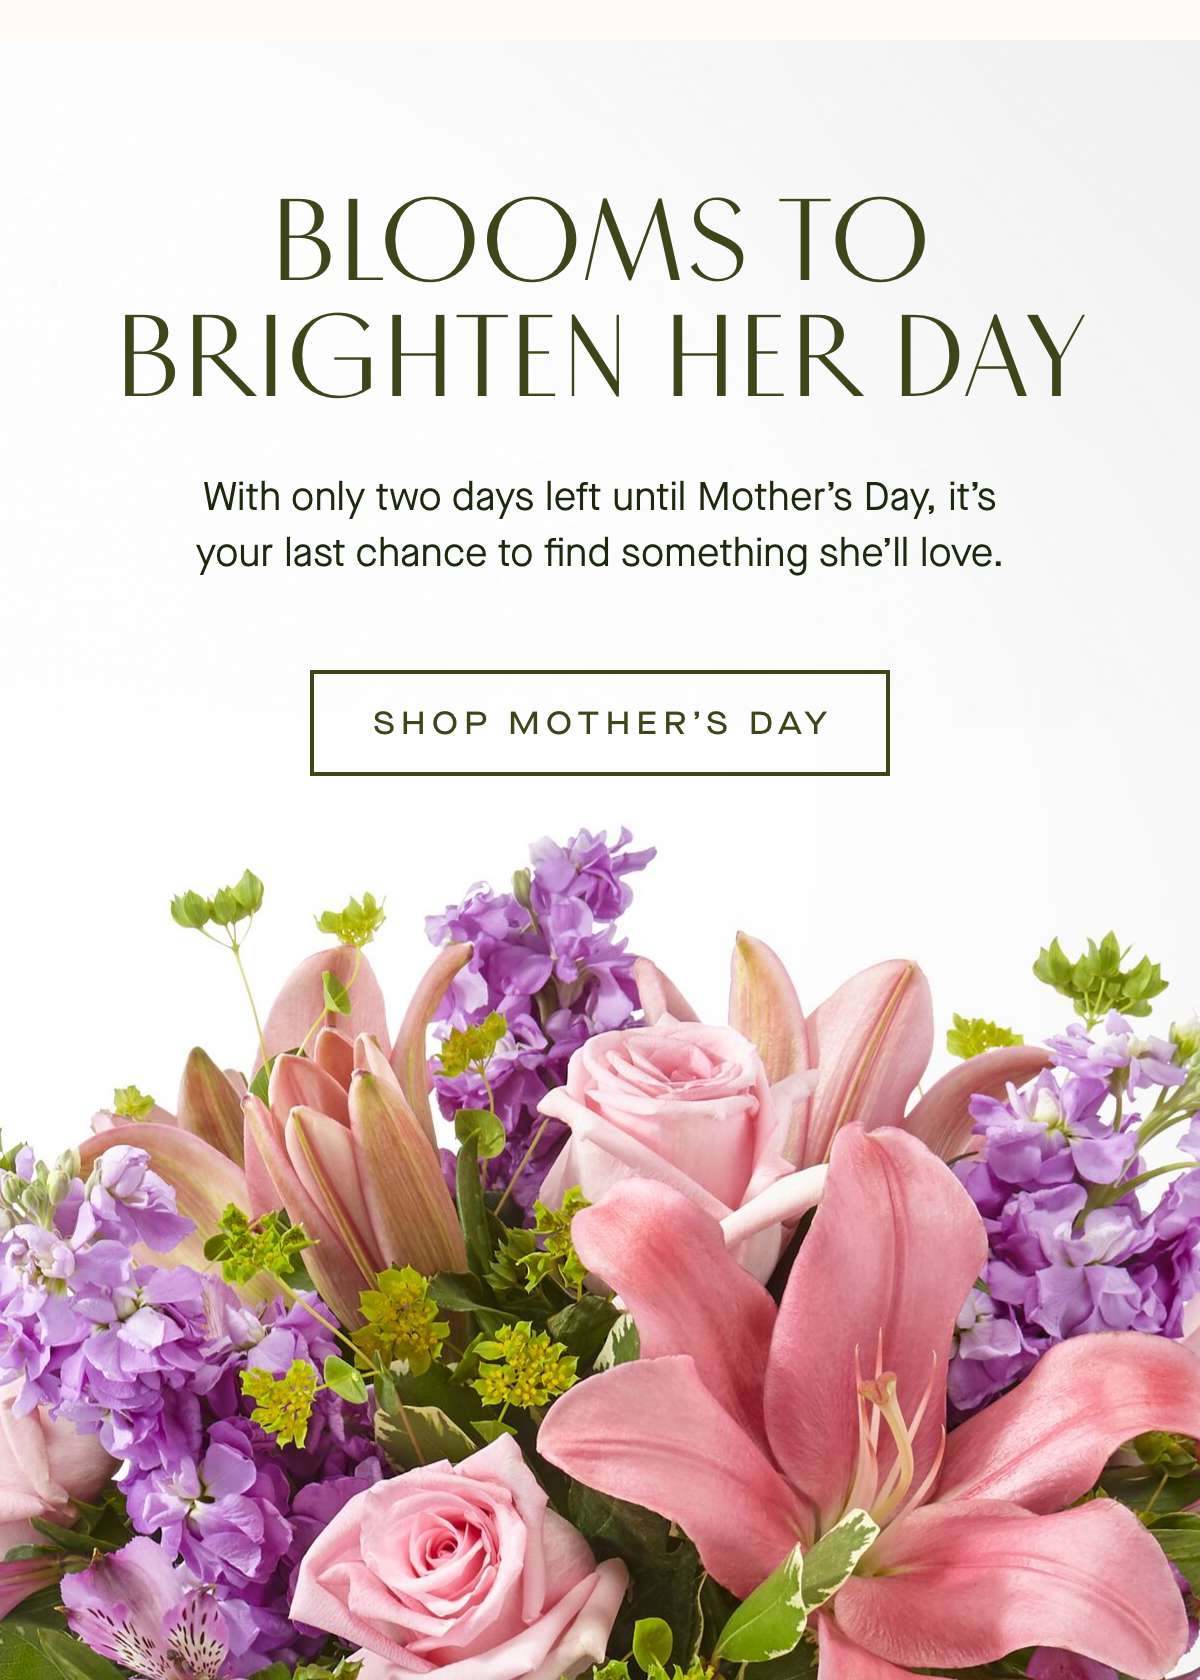 BLOOMS TO BRIGHTEN HER DAY - With only two days left until Mother's Day, it's your last chance to find something she'll love. SHOP MOTHER'S DAY